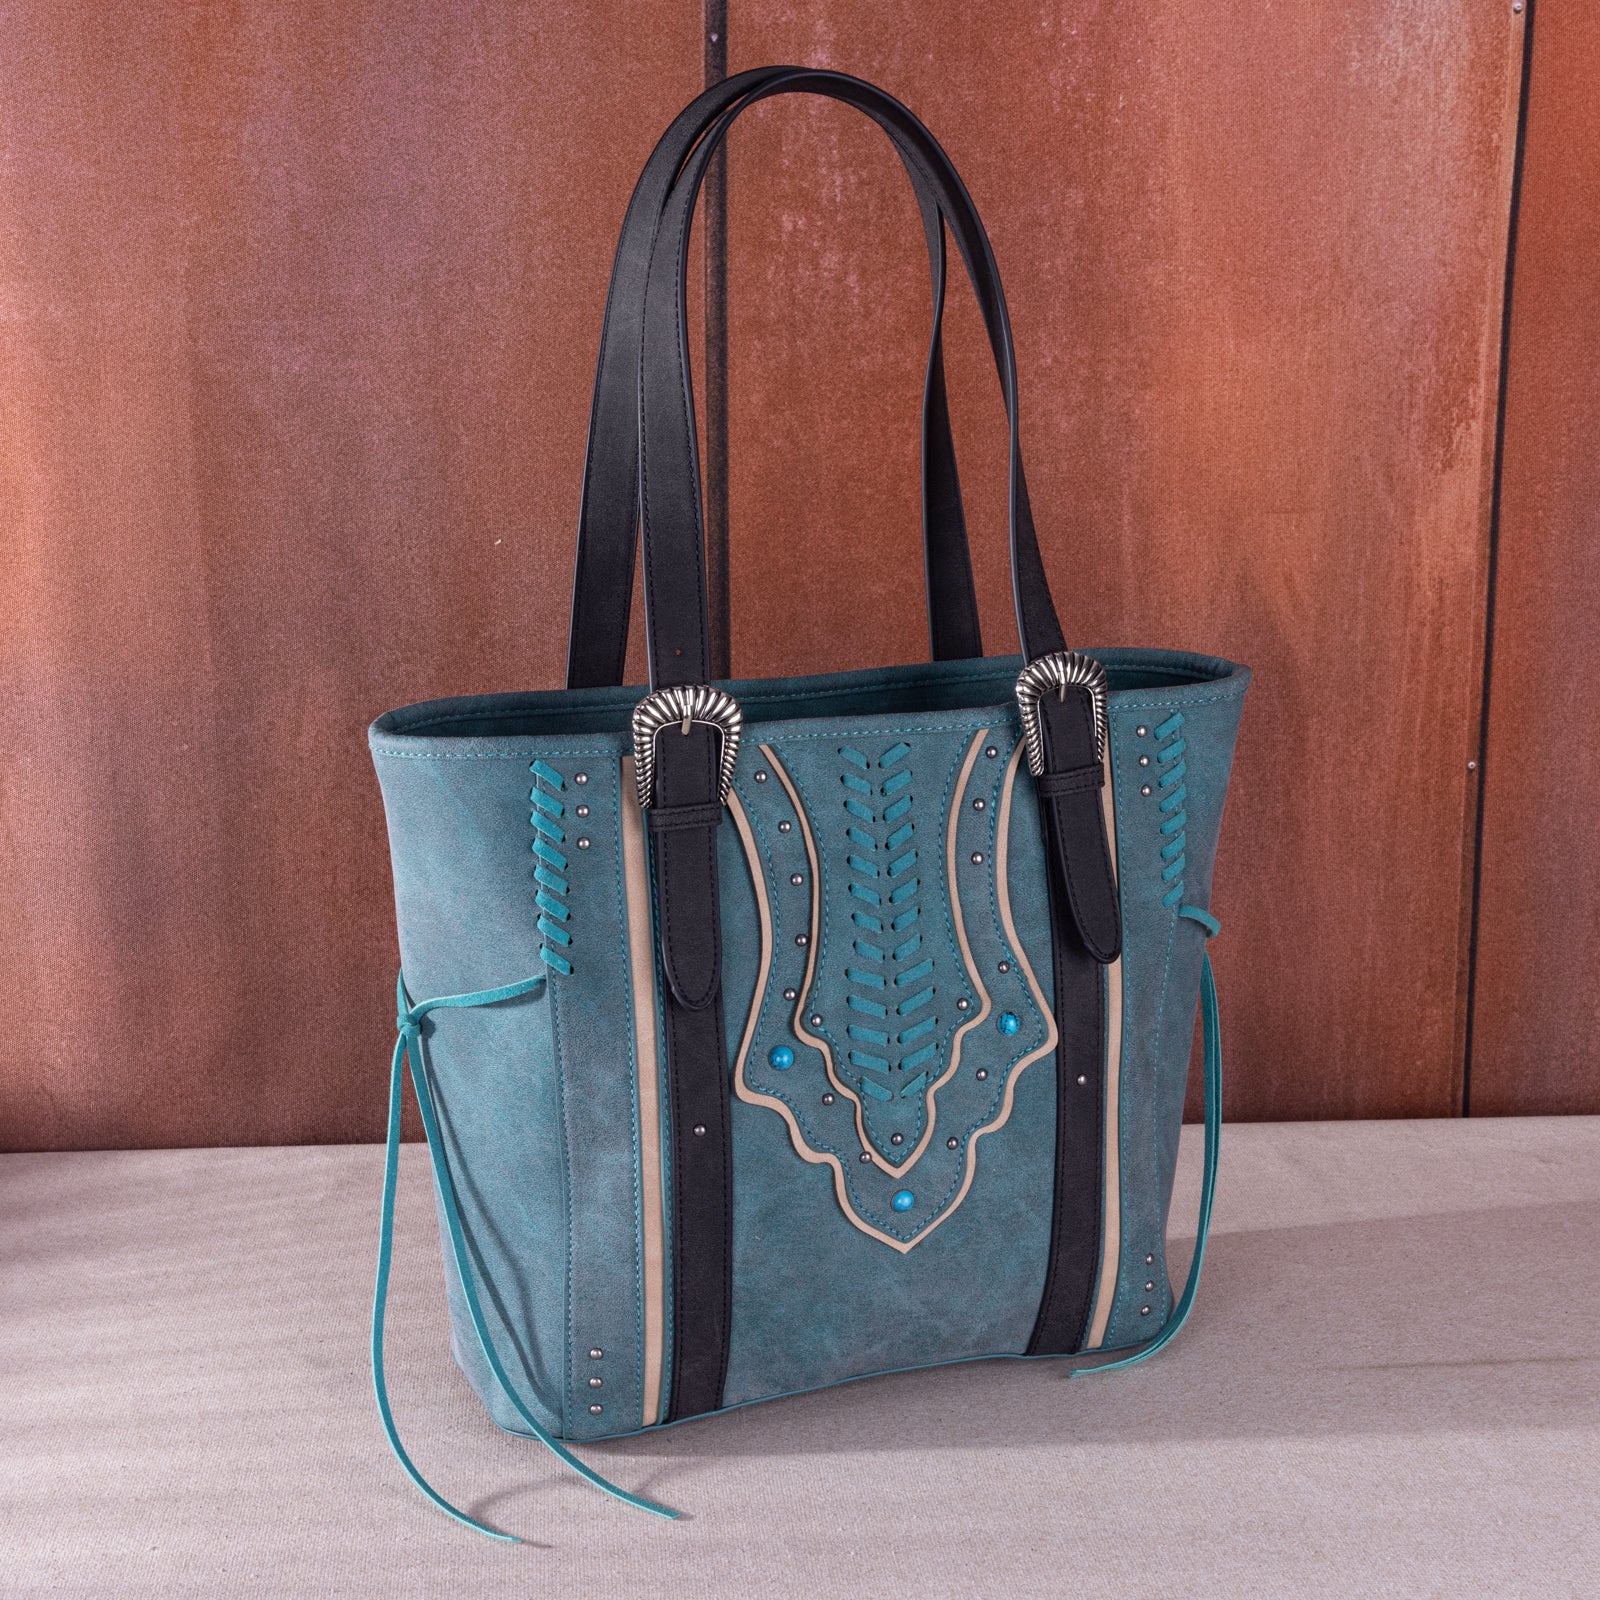 Montana West Whipstitch Concealed Carry Tote Set